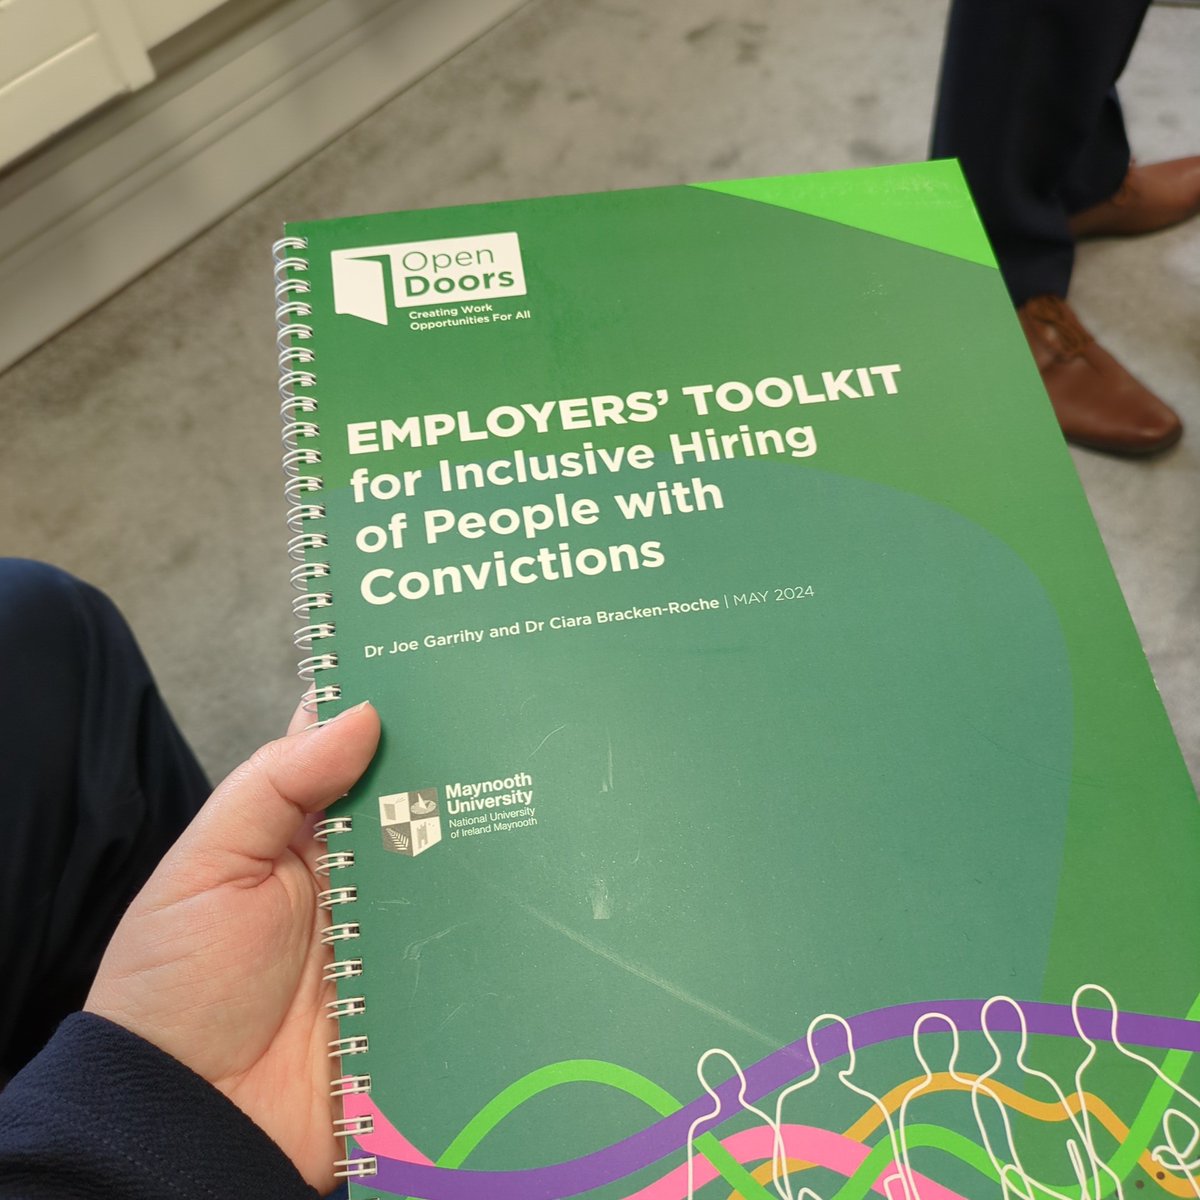 Happy to launch this toolkit w @JoeGarrihy1 @OpenDoorsToWork @_IHREC @ibec_irl this morning. #EmployersToolkit for inclusive hiring of people with convictions.